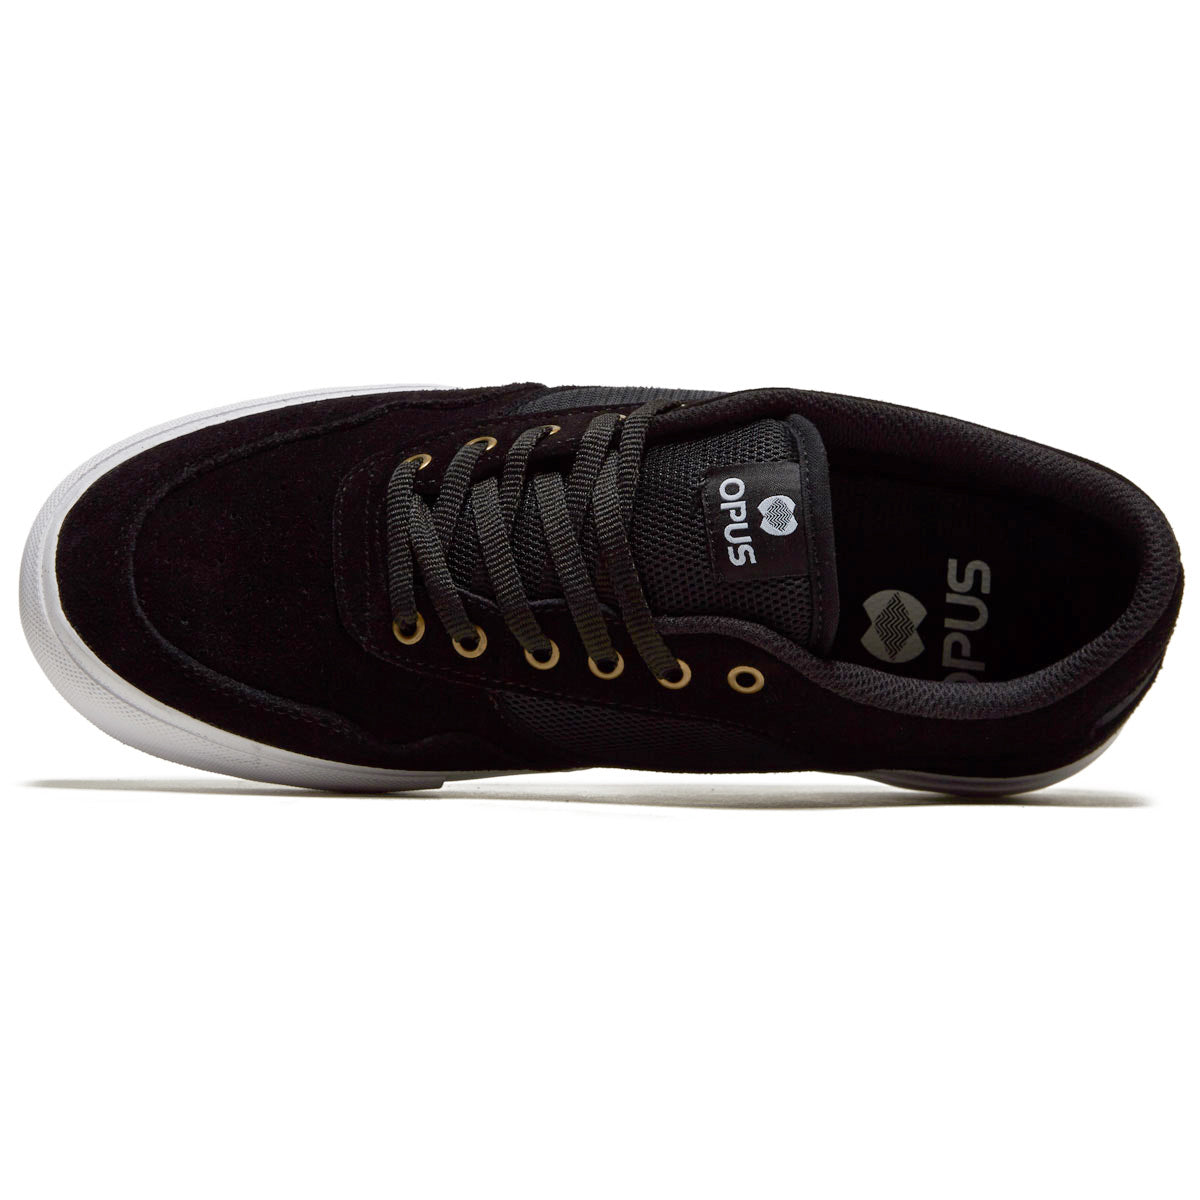 Opus Standard Low Shoes - Black/White image 3